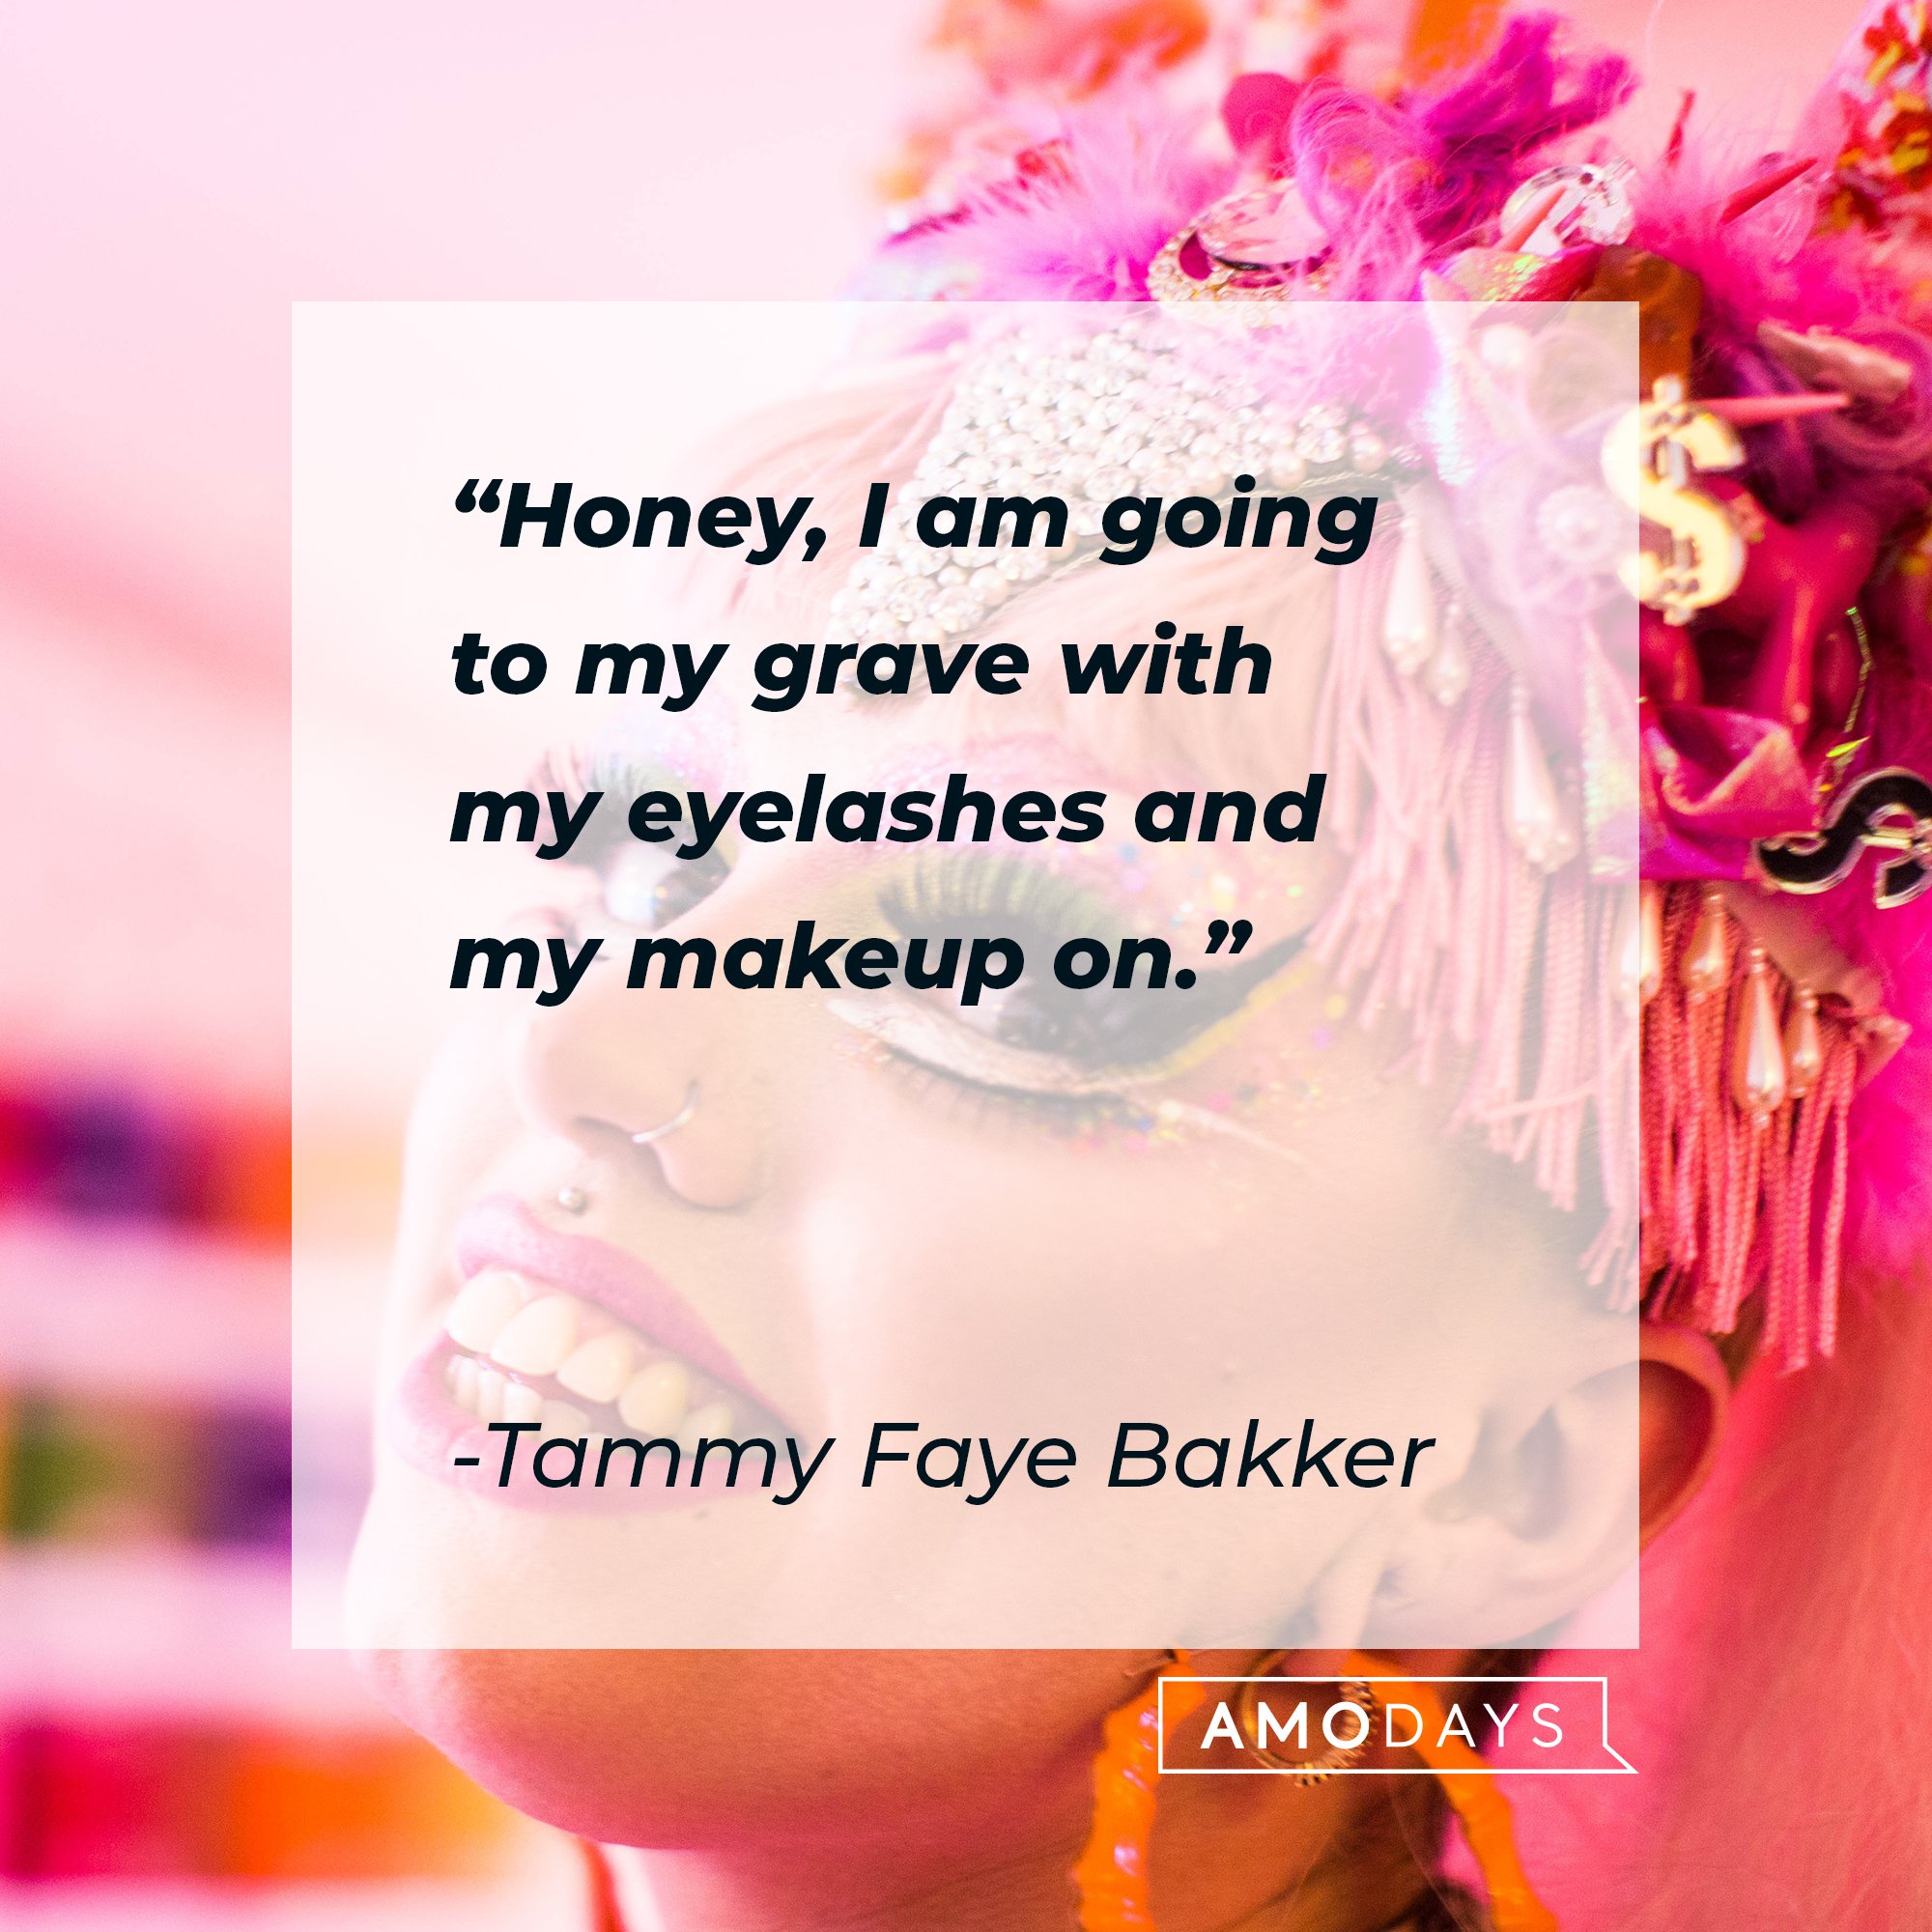  Tammy Faye Bakker’s quote: "Honey, I am going to my grave with my eyelashes and my makeup on."  | Image: AmoDays